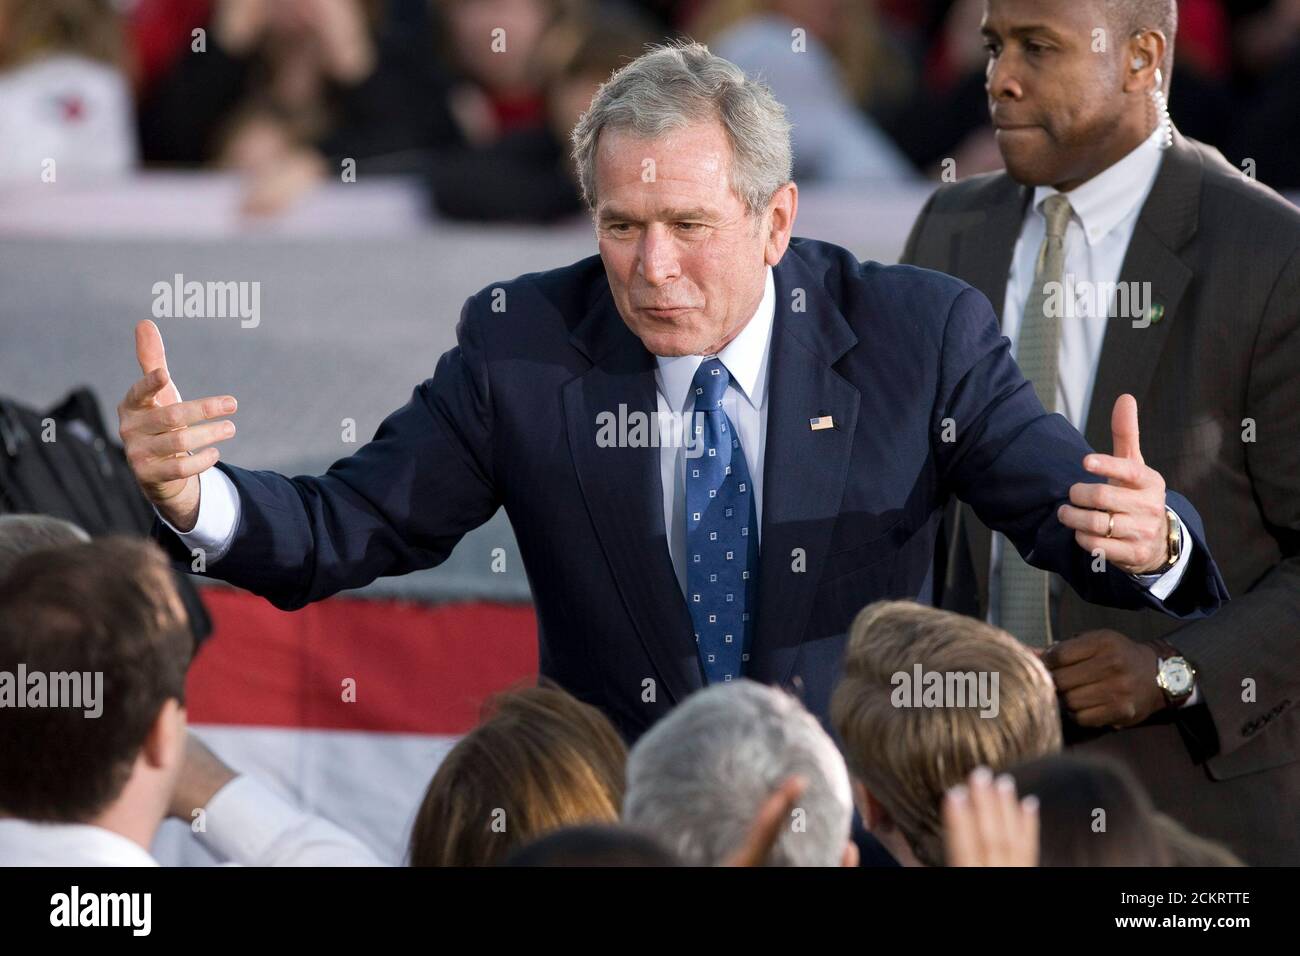 Midland, Texas January 20, 2009: Former President George W. Bush is greeted by 20,000 well-wishers in downtown Midland Tuesday after his return from Washington as a private citizen following the inauguration of Barack Obama.  ©Bob Daemmrich Stock Photo